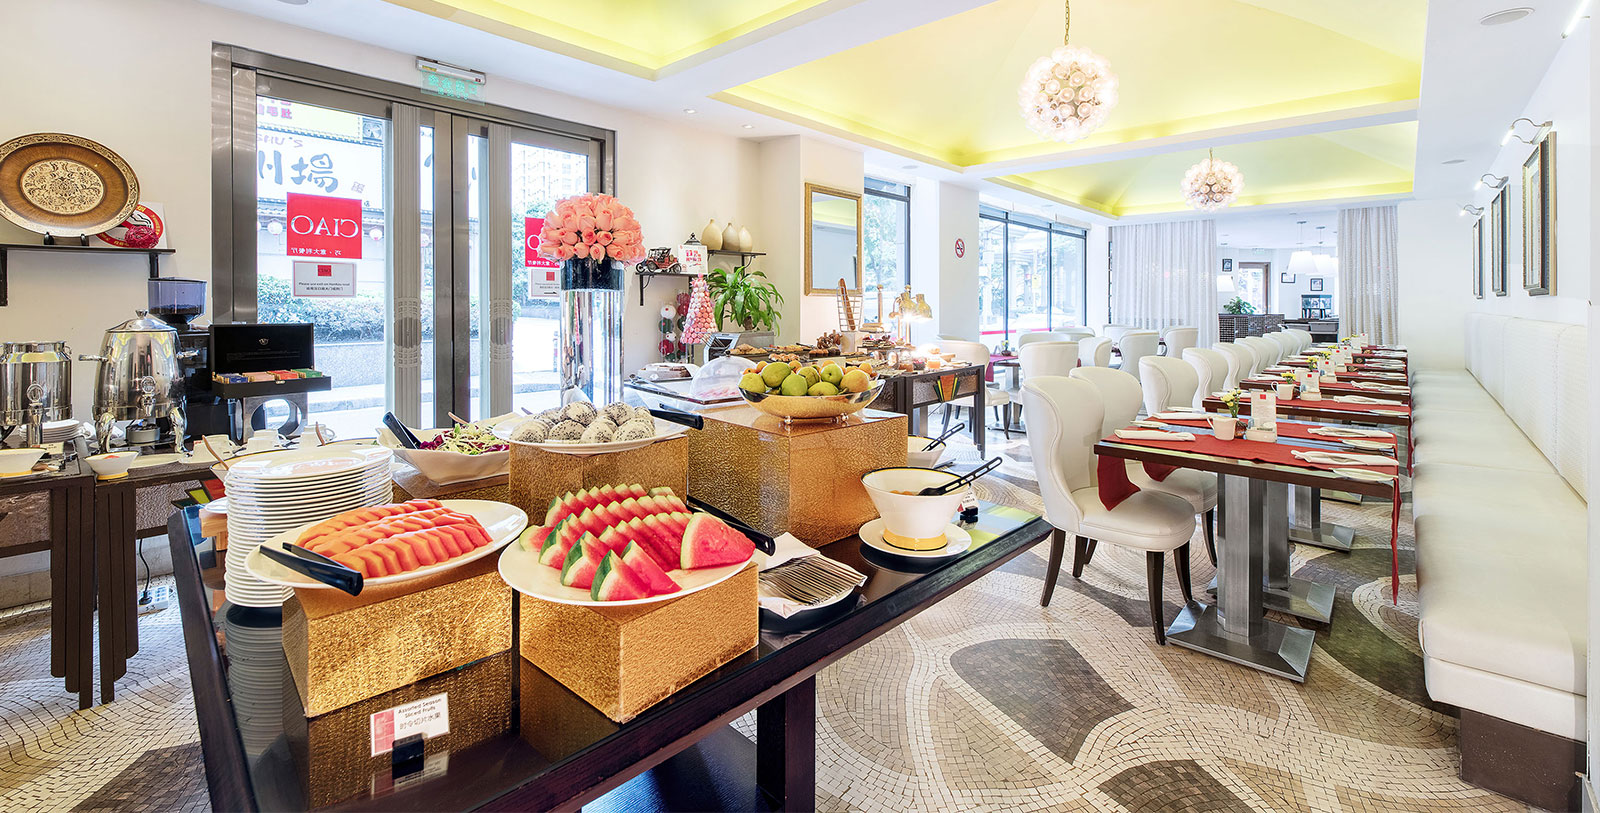 Taste tradtional Cantonese cuisine served in luxury at Tang Restaurant.